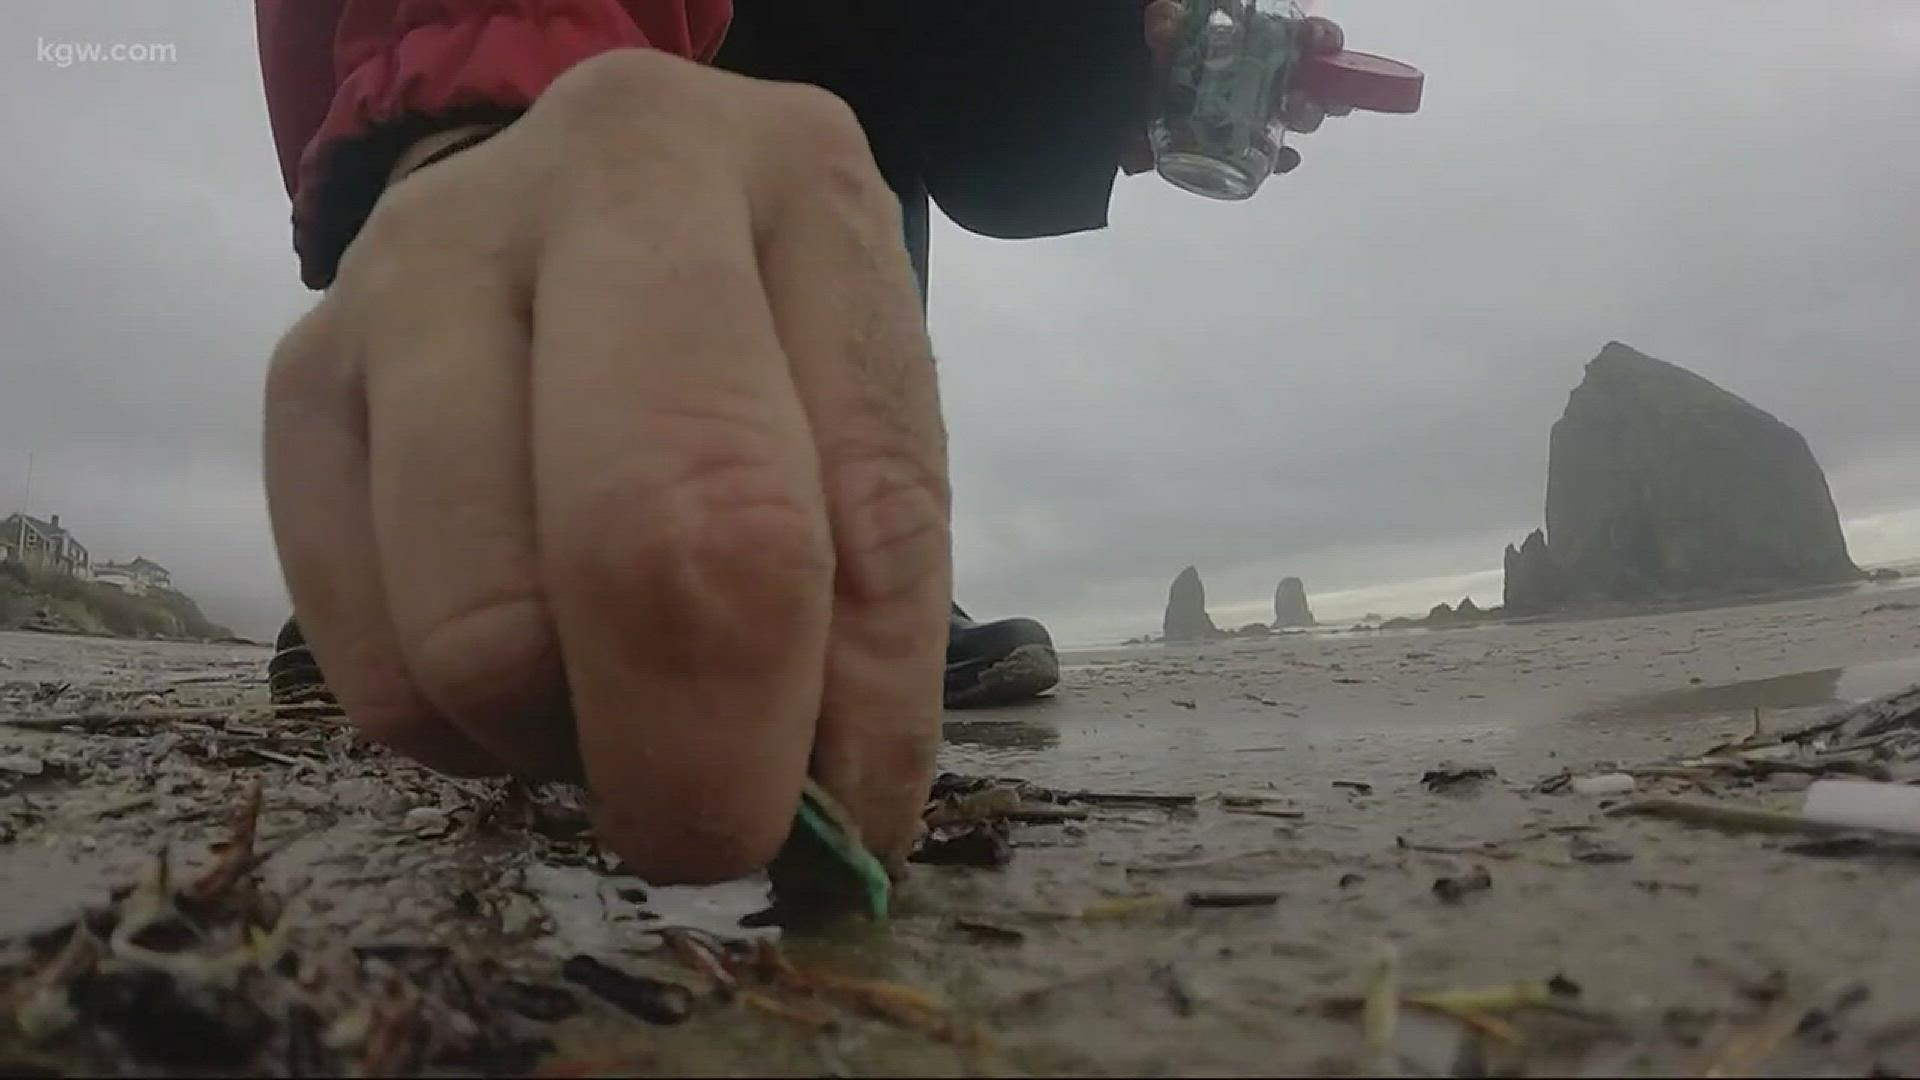 They wash up onto our beaches every day. Tiny bits of plastic. But one woman has found a way to turn that trash into treasure. KGW environmental reporter Keely Chalmers has the story.